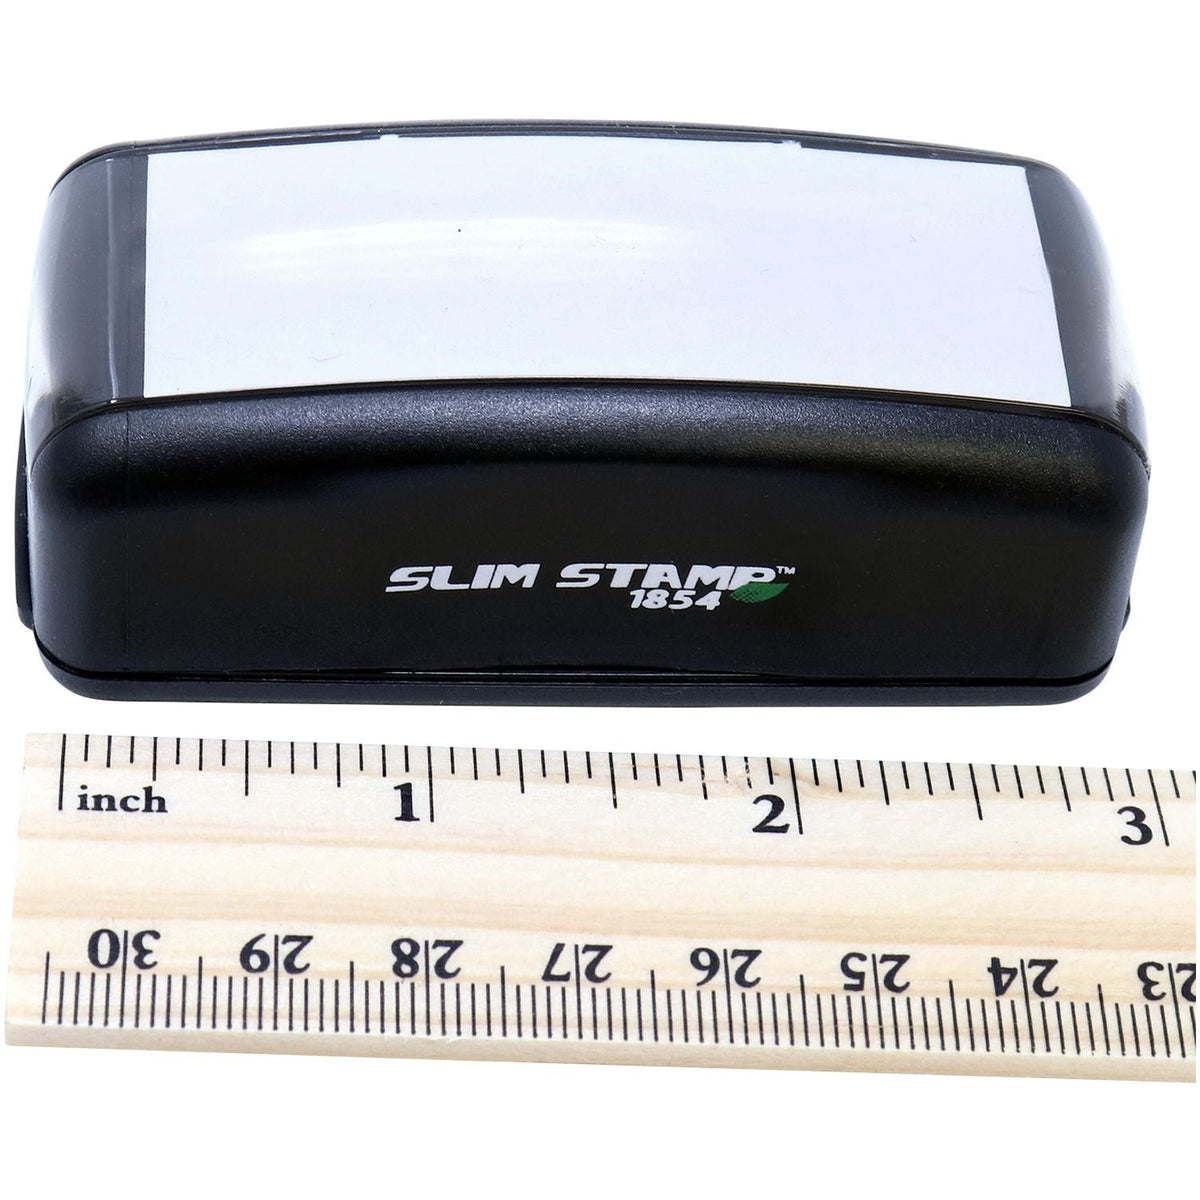 Measurement Large Pre-Inked Contestado Stamp with Ruler